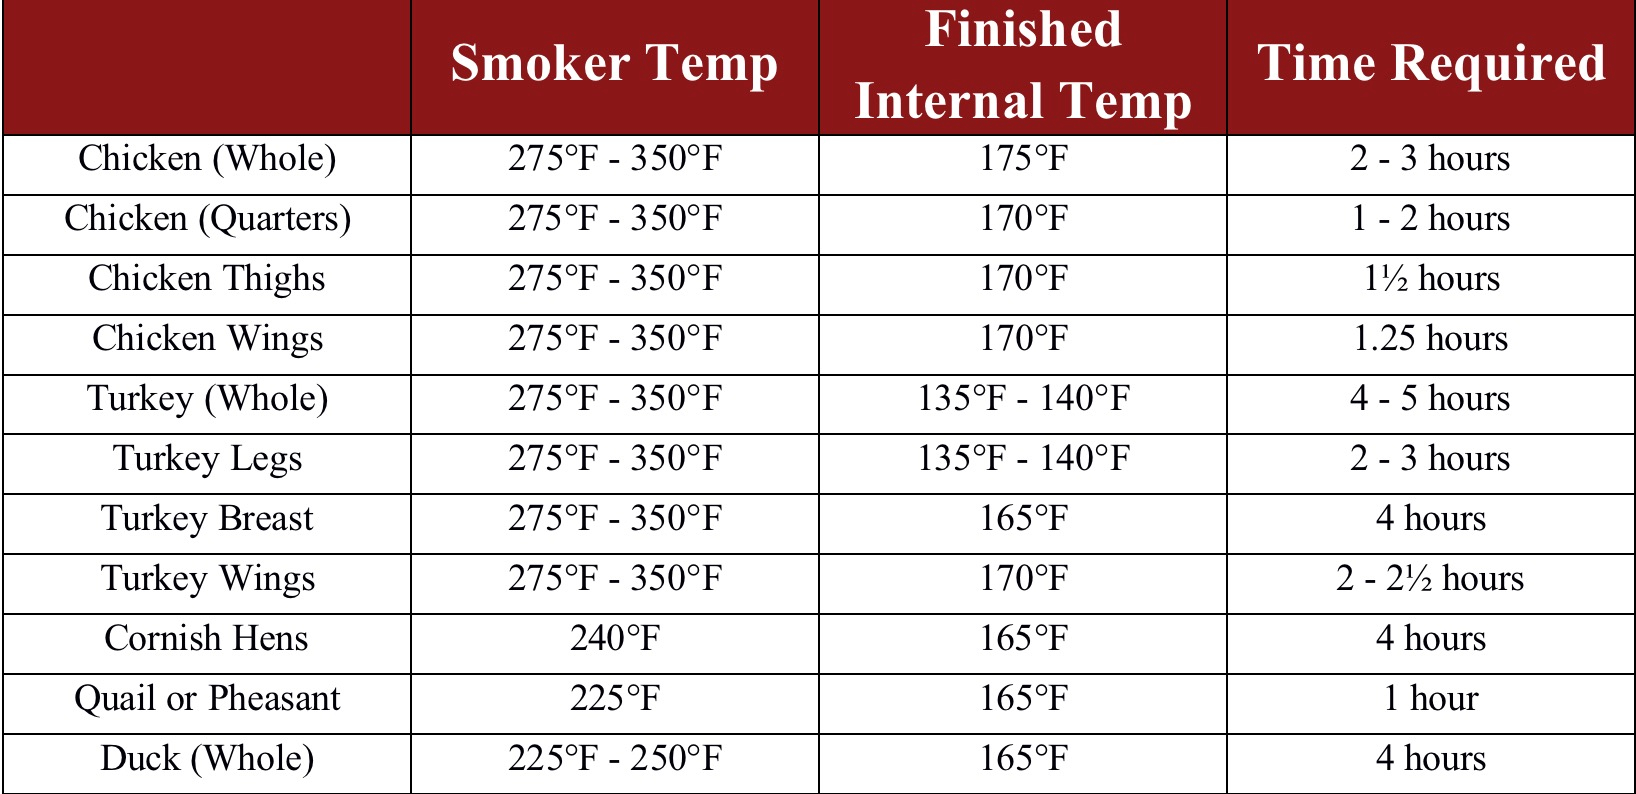 Poultry Smoking Times and Temperatures